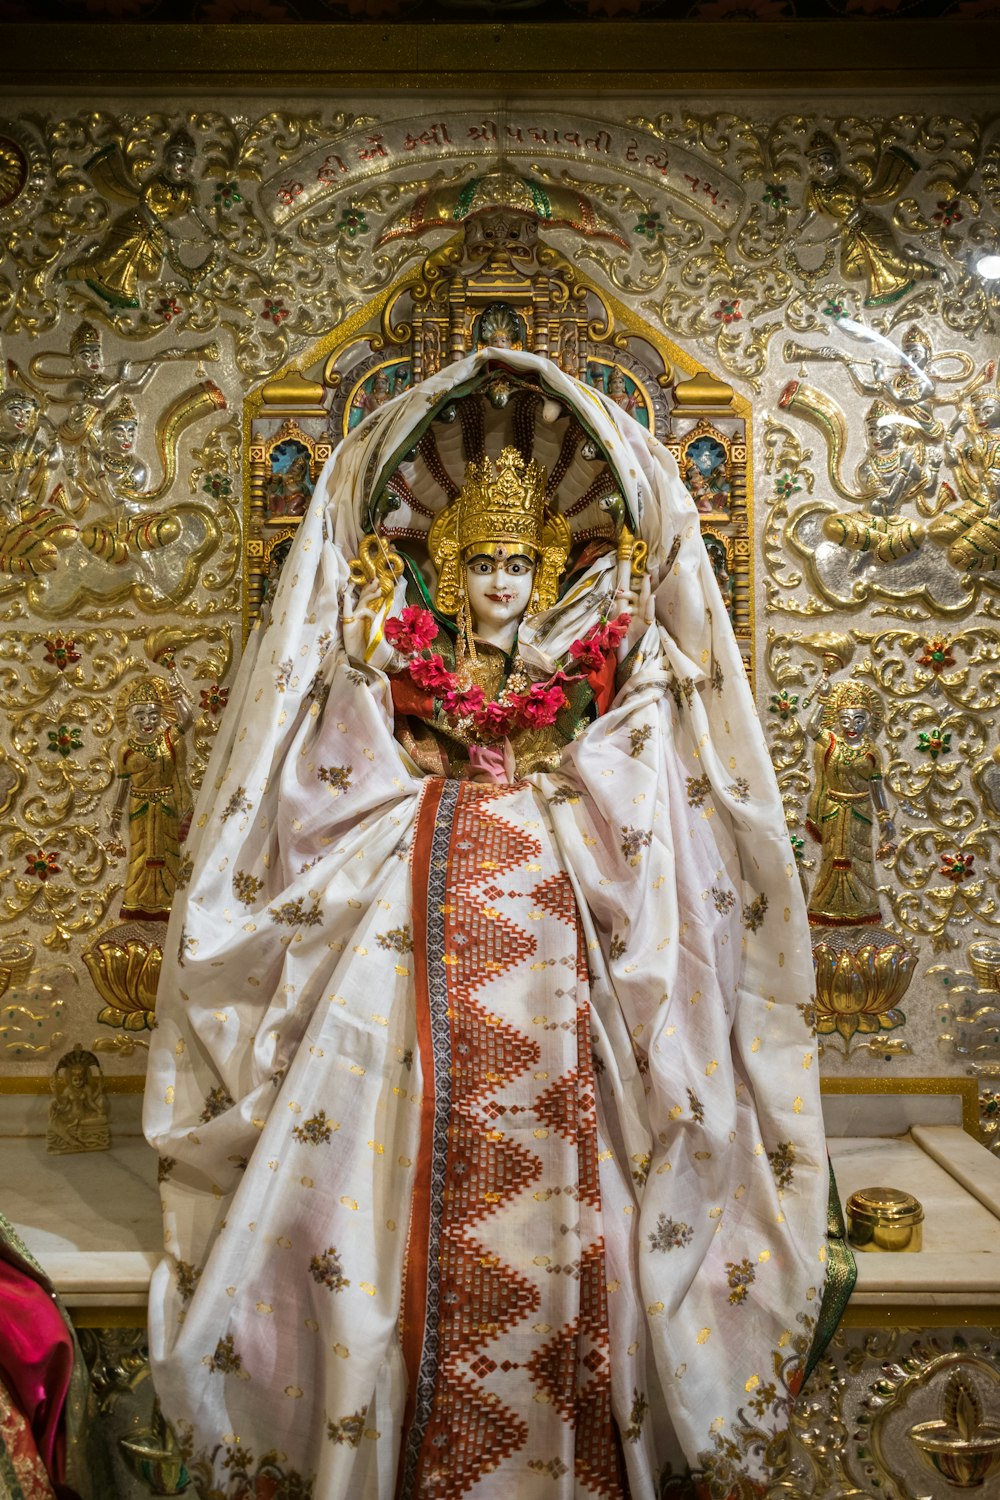 a statue of a person dressed in white and gold